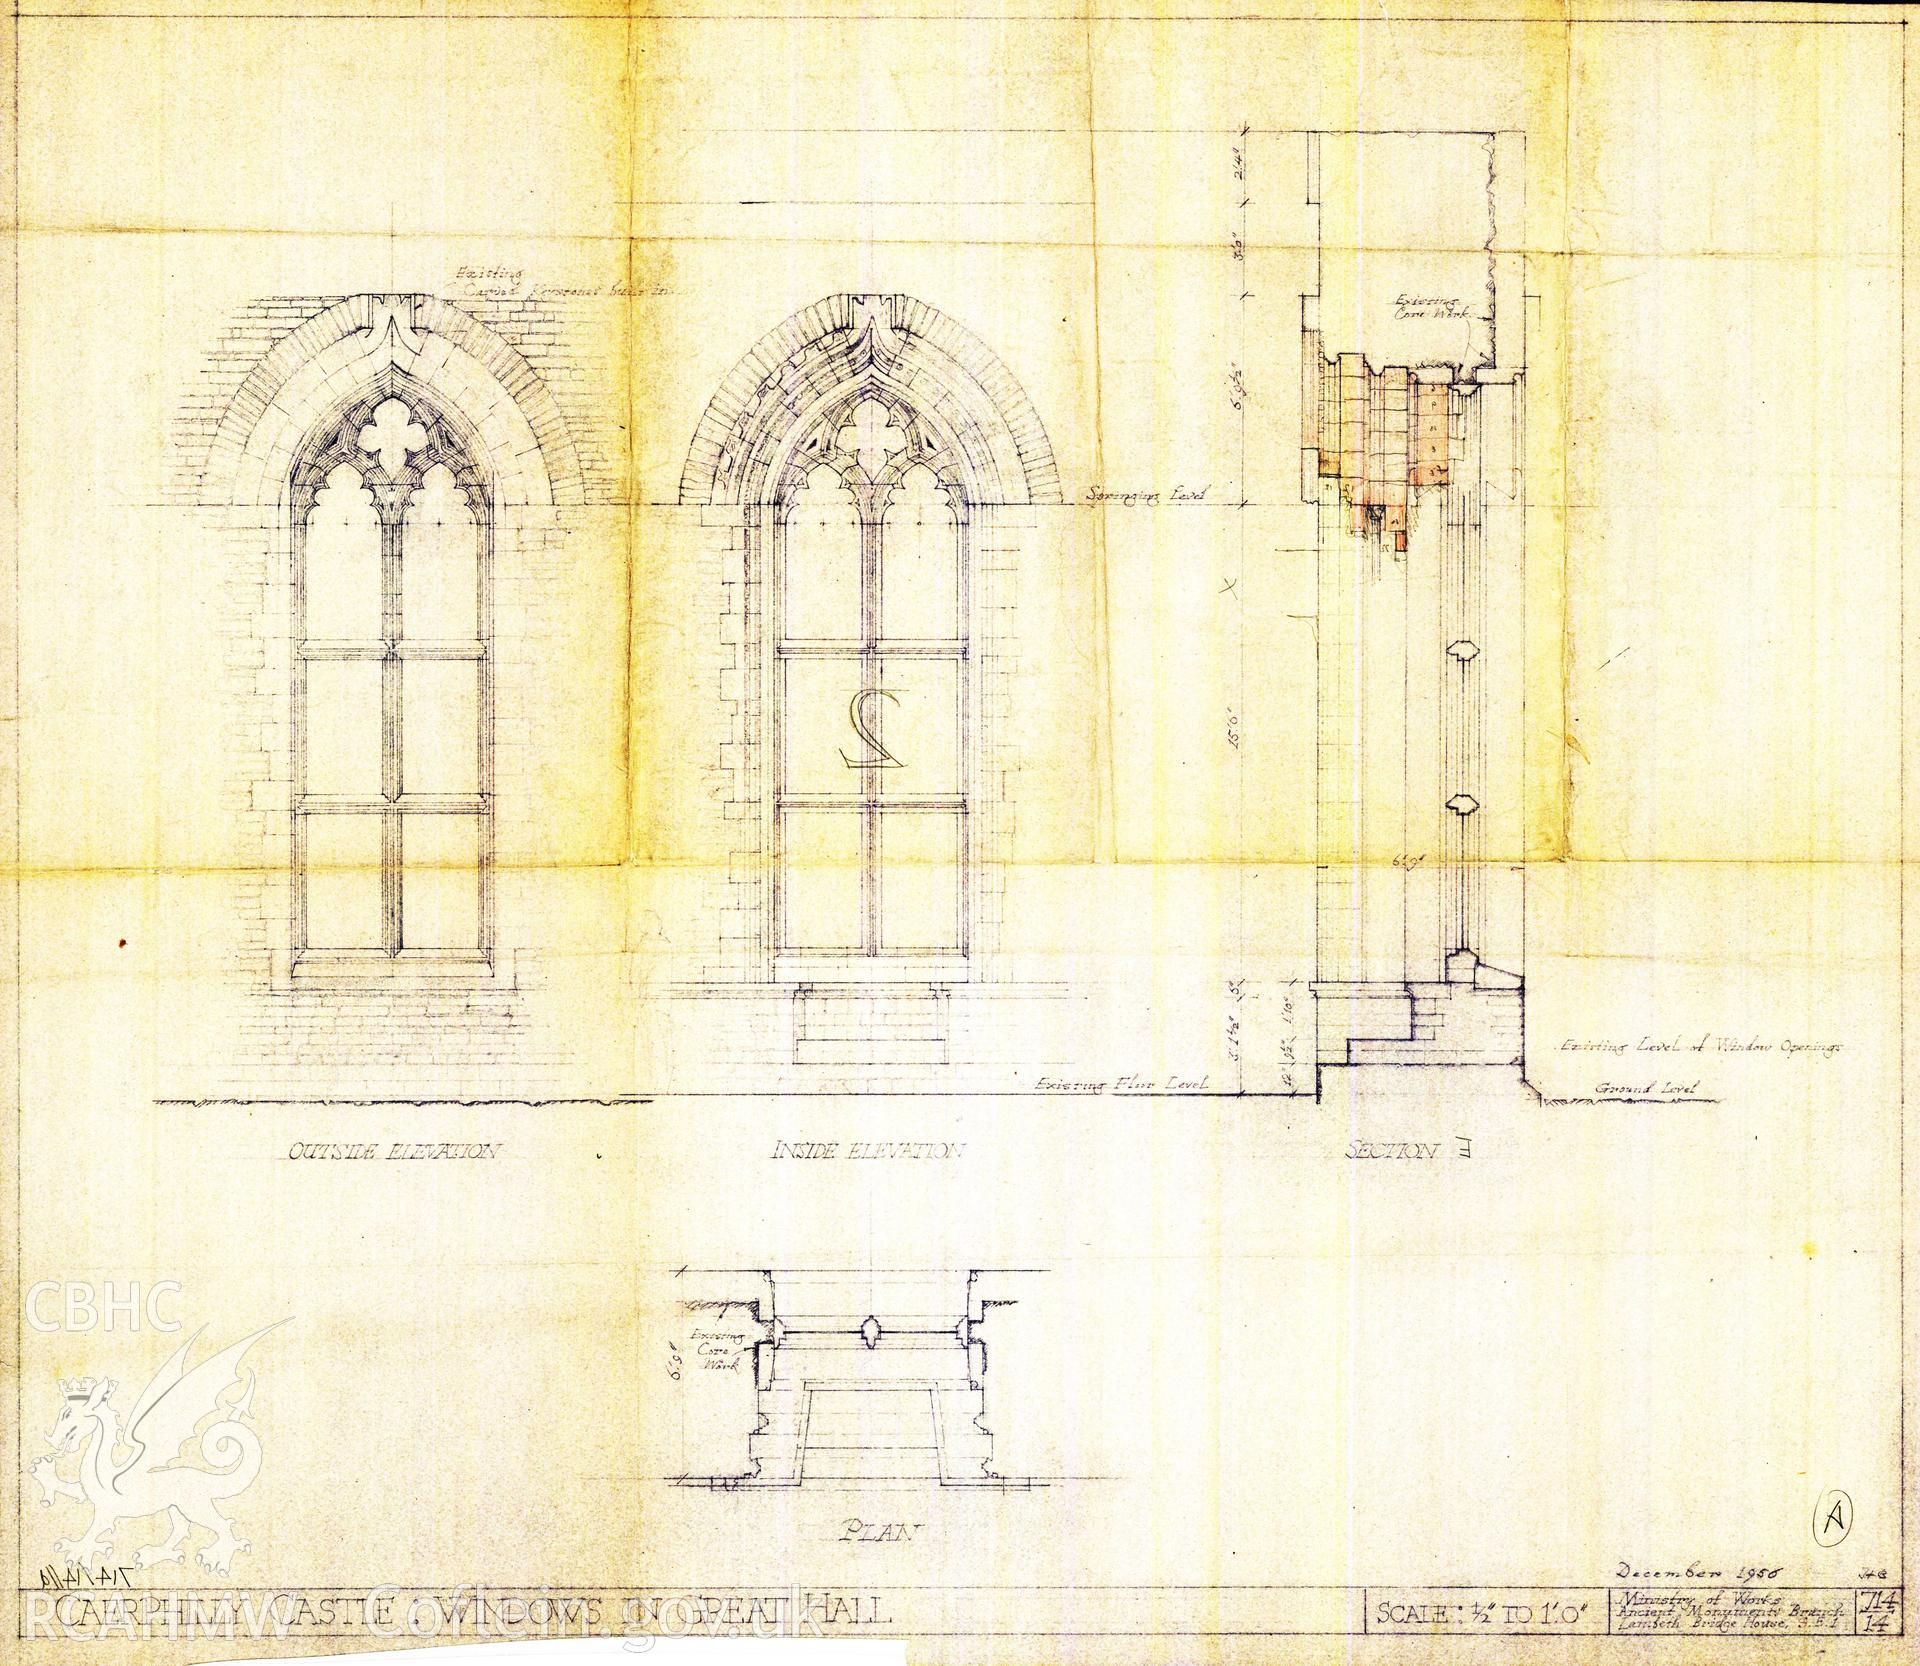 Cadw guardianship monument drawing of Caerphilly Castle. Hall, window 1, stonework + E jamb. Cadw ref. no: 714/14//b. Scale 1:24.